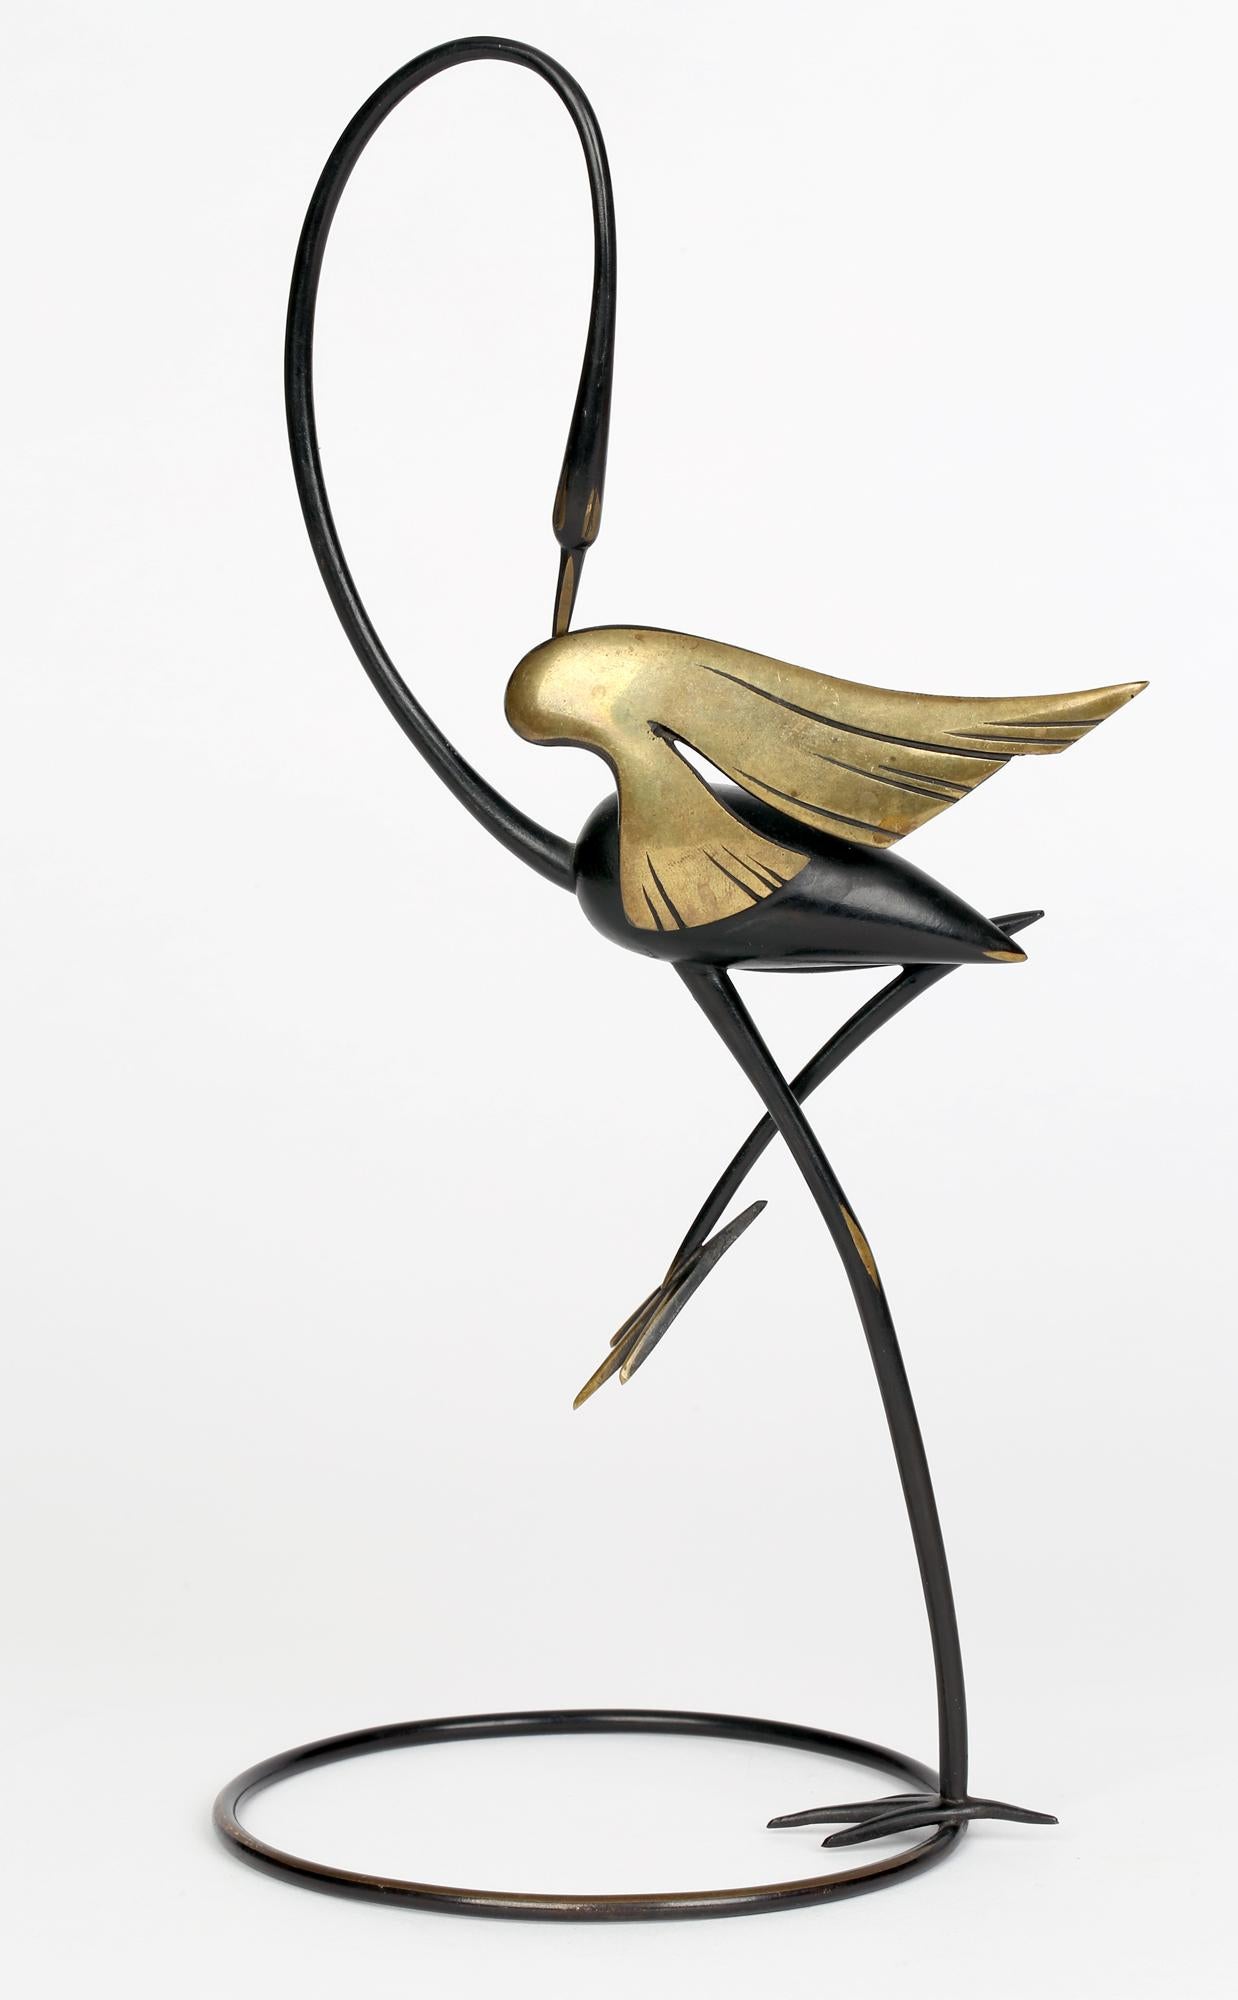 A very stylish Austrian Art Deco stylized bronze figure of a wading bird by Richard Rohac (Austrian, 1906-1956) made in Vienna in the early 1930’s. Rohac spent his early years as an apprentice with Werkstätte Hagenauer Wien and continued to work